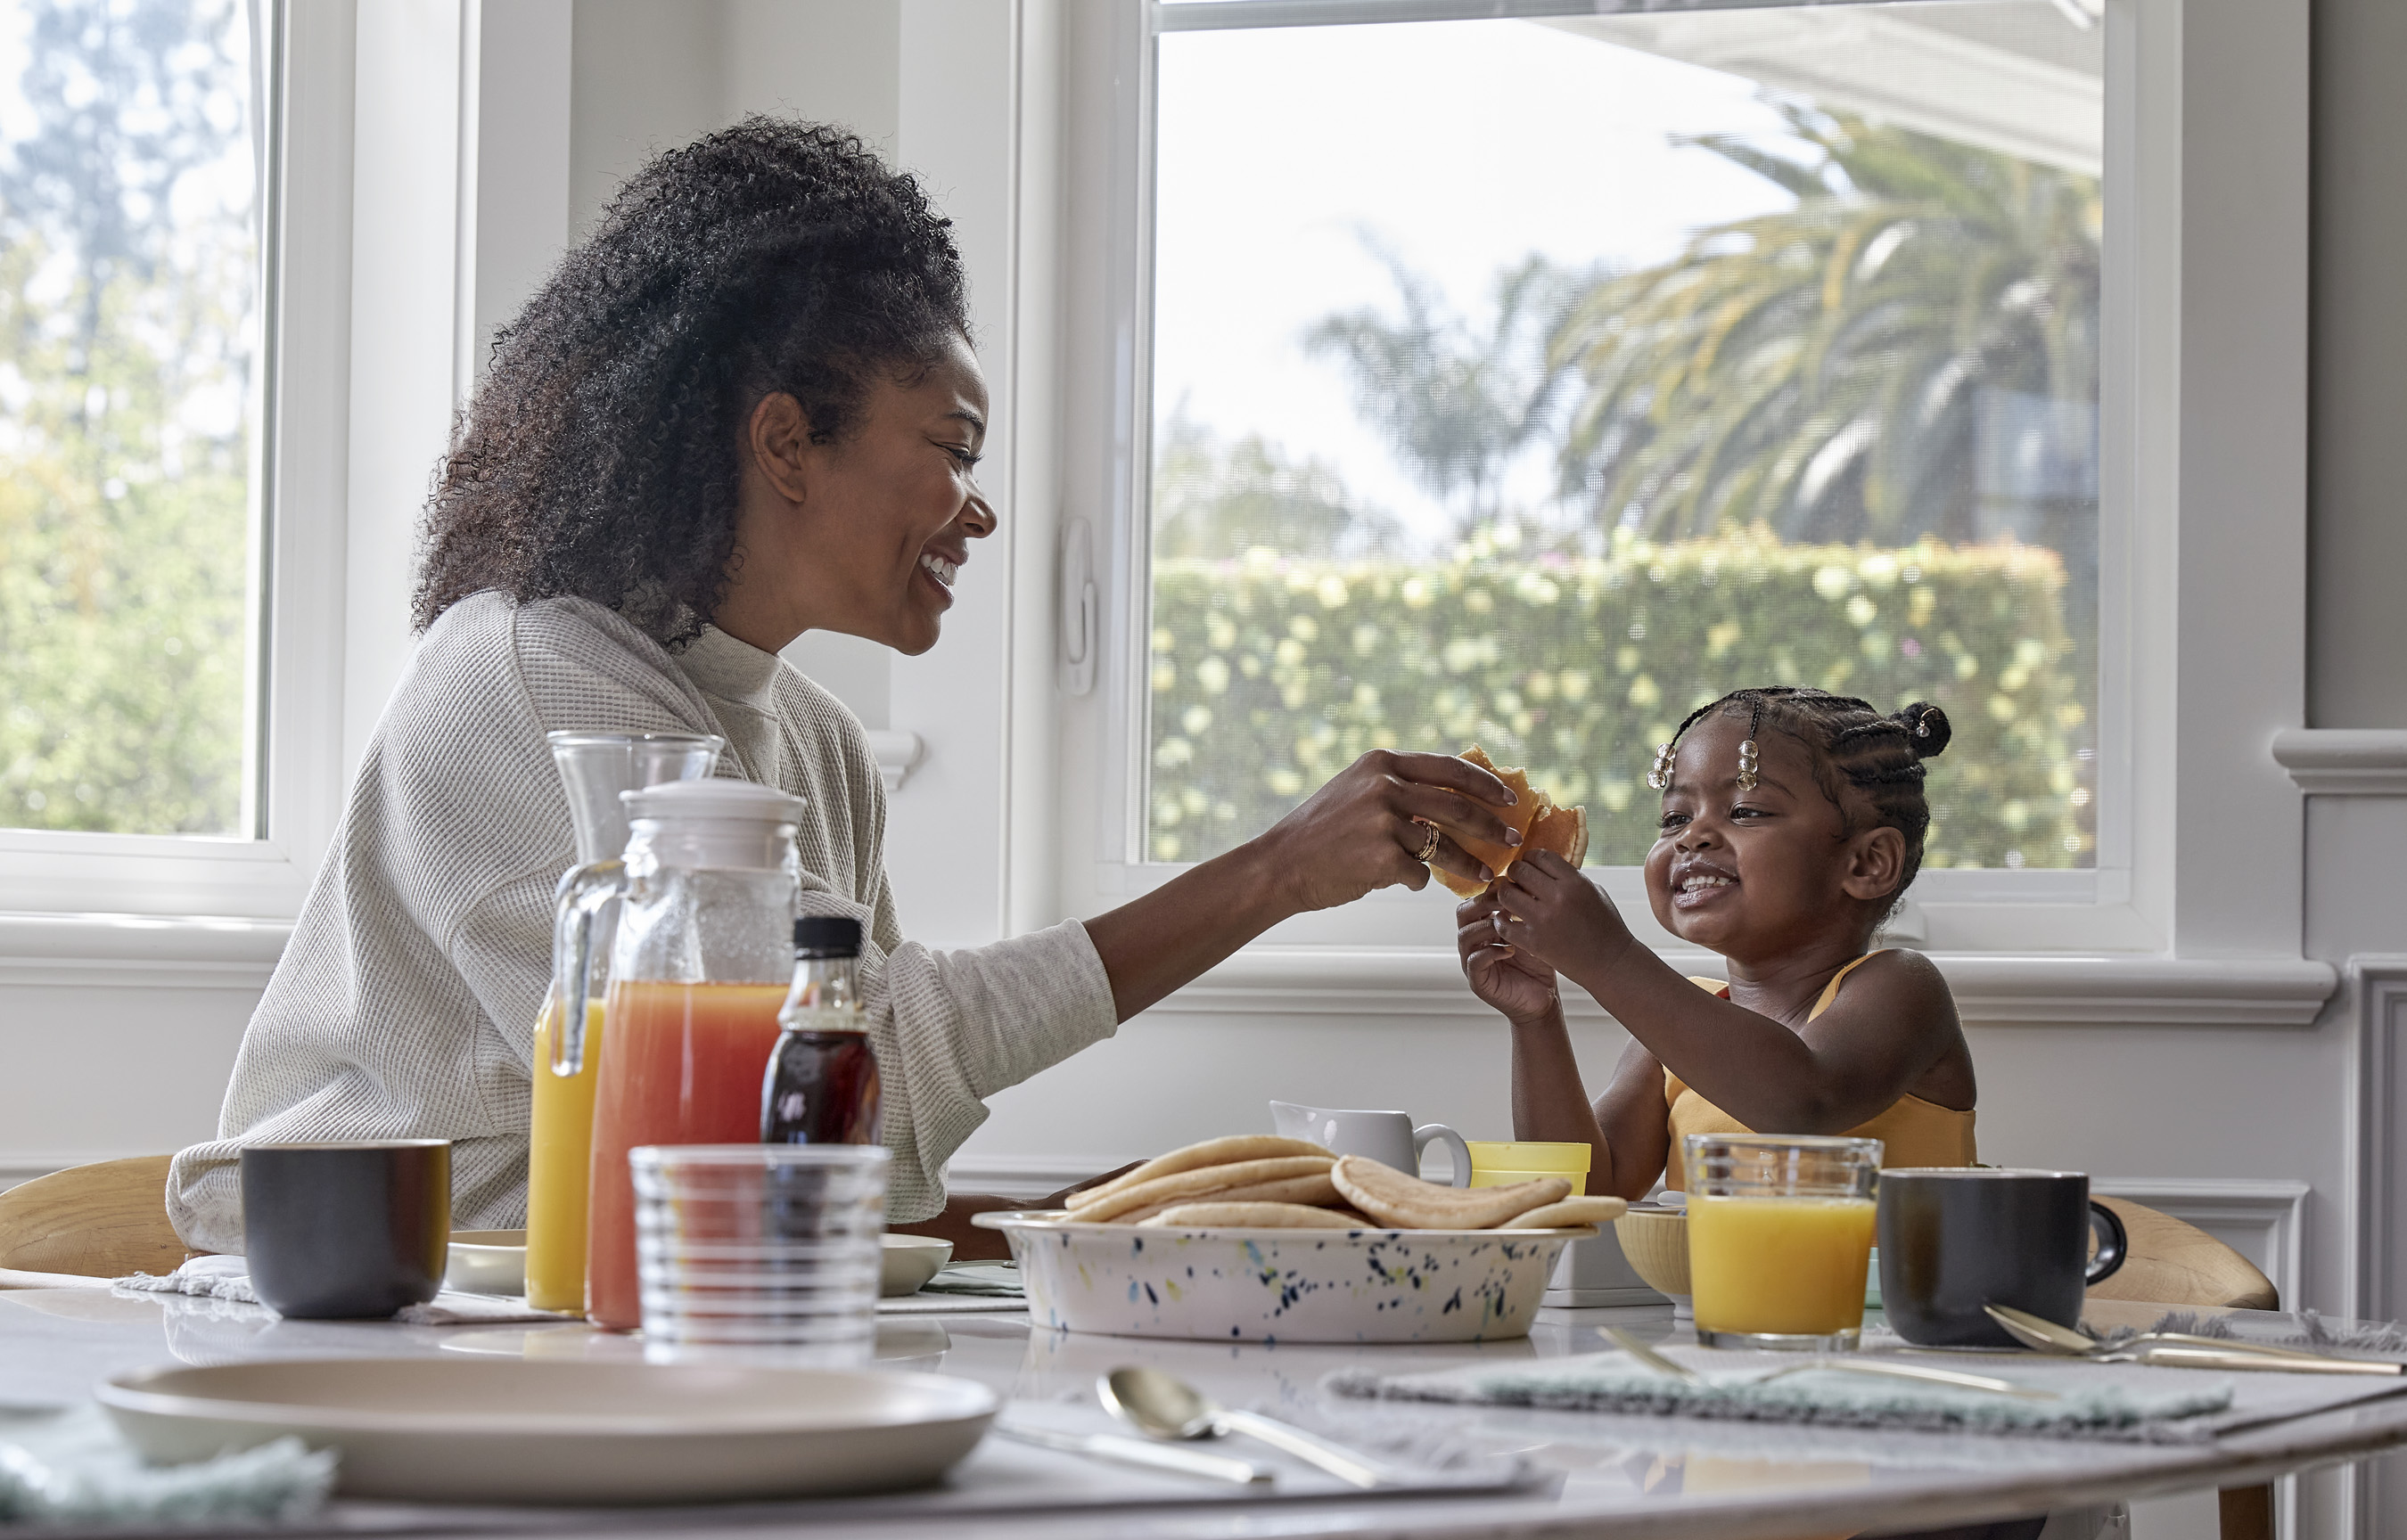 Gabrielle Union-Wade Joins 'Don't Skip' Campaign to Encourage Doctor Well-Visits and Recommended Vaccinations